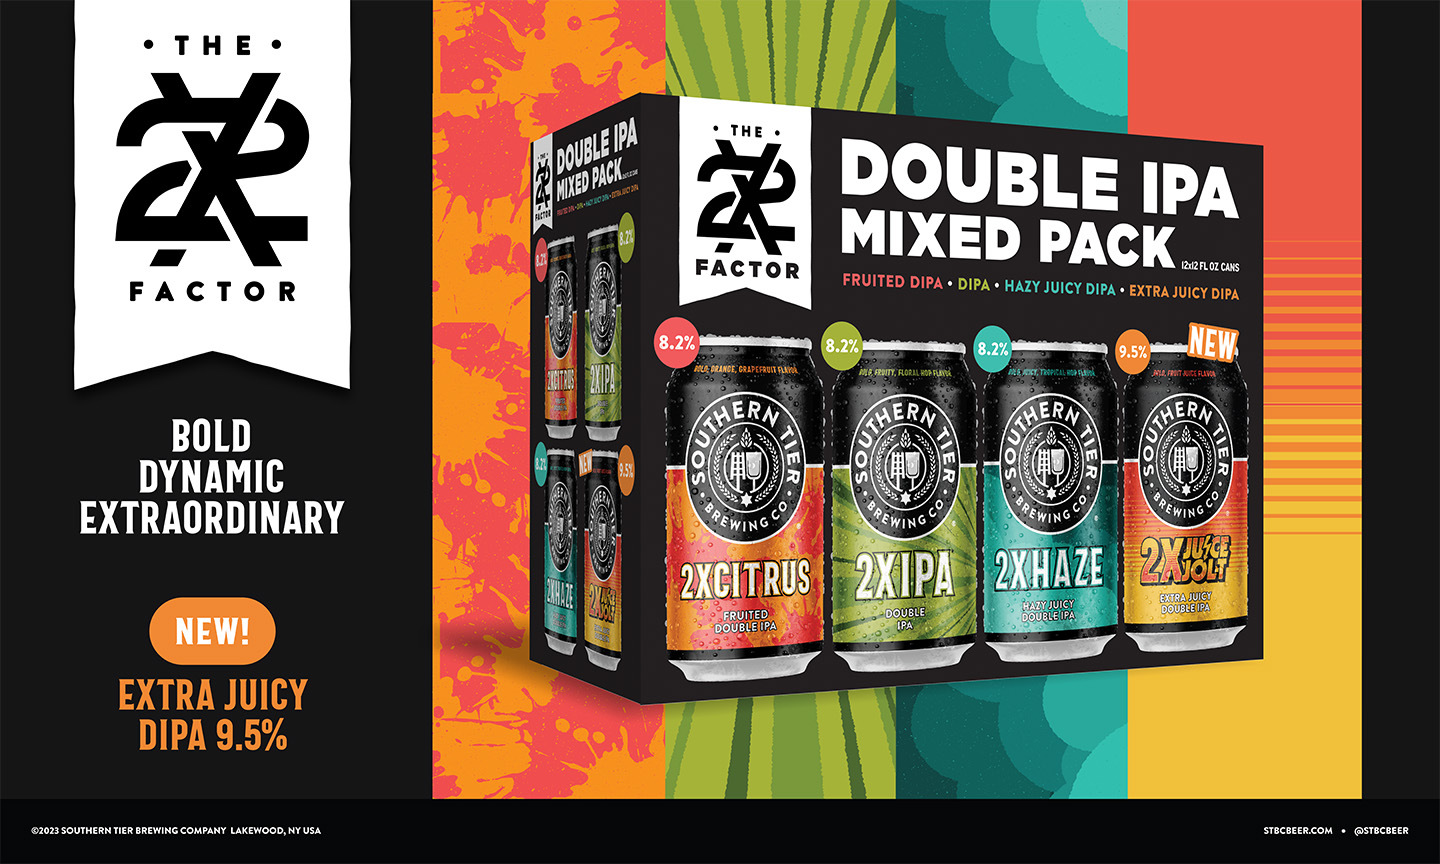 2X Factor Variety Pack